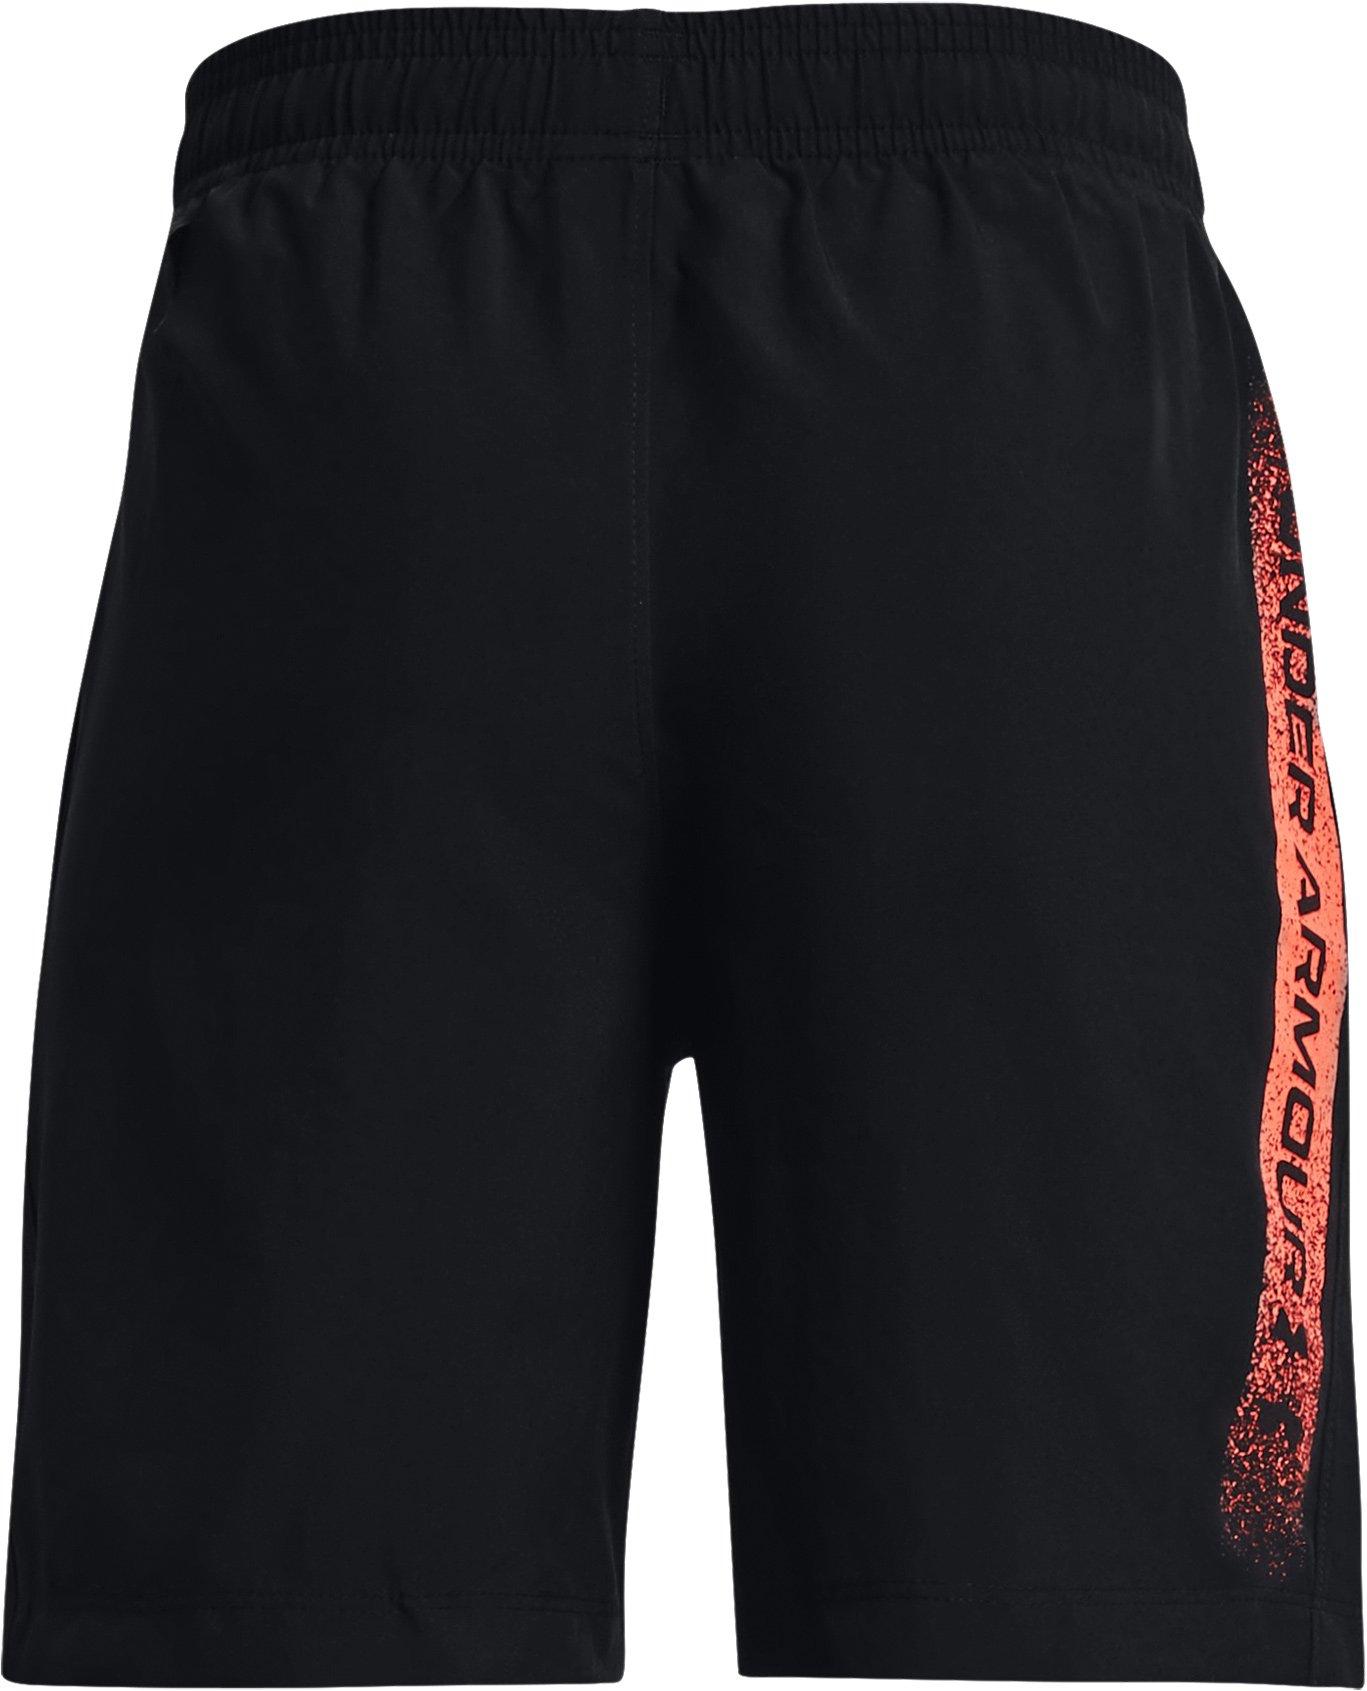 Under Armour Woven Graphic Shorts-BLK XS